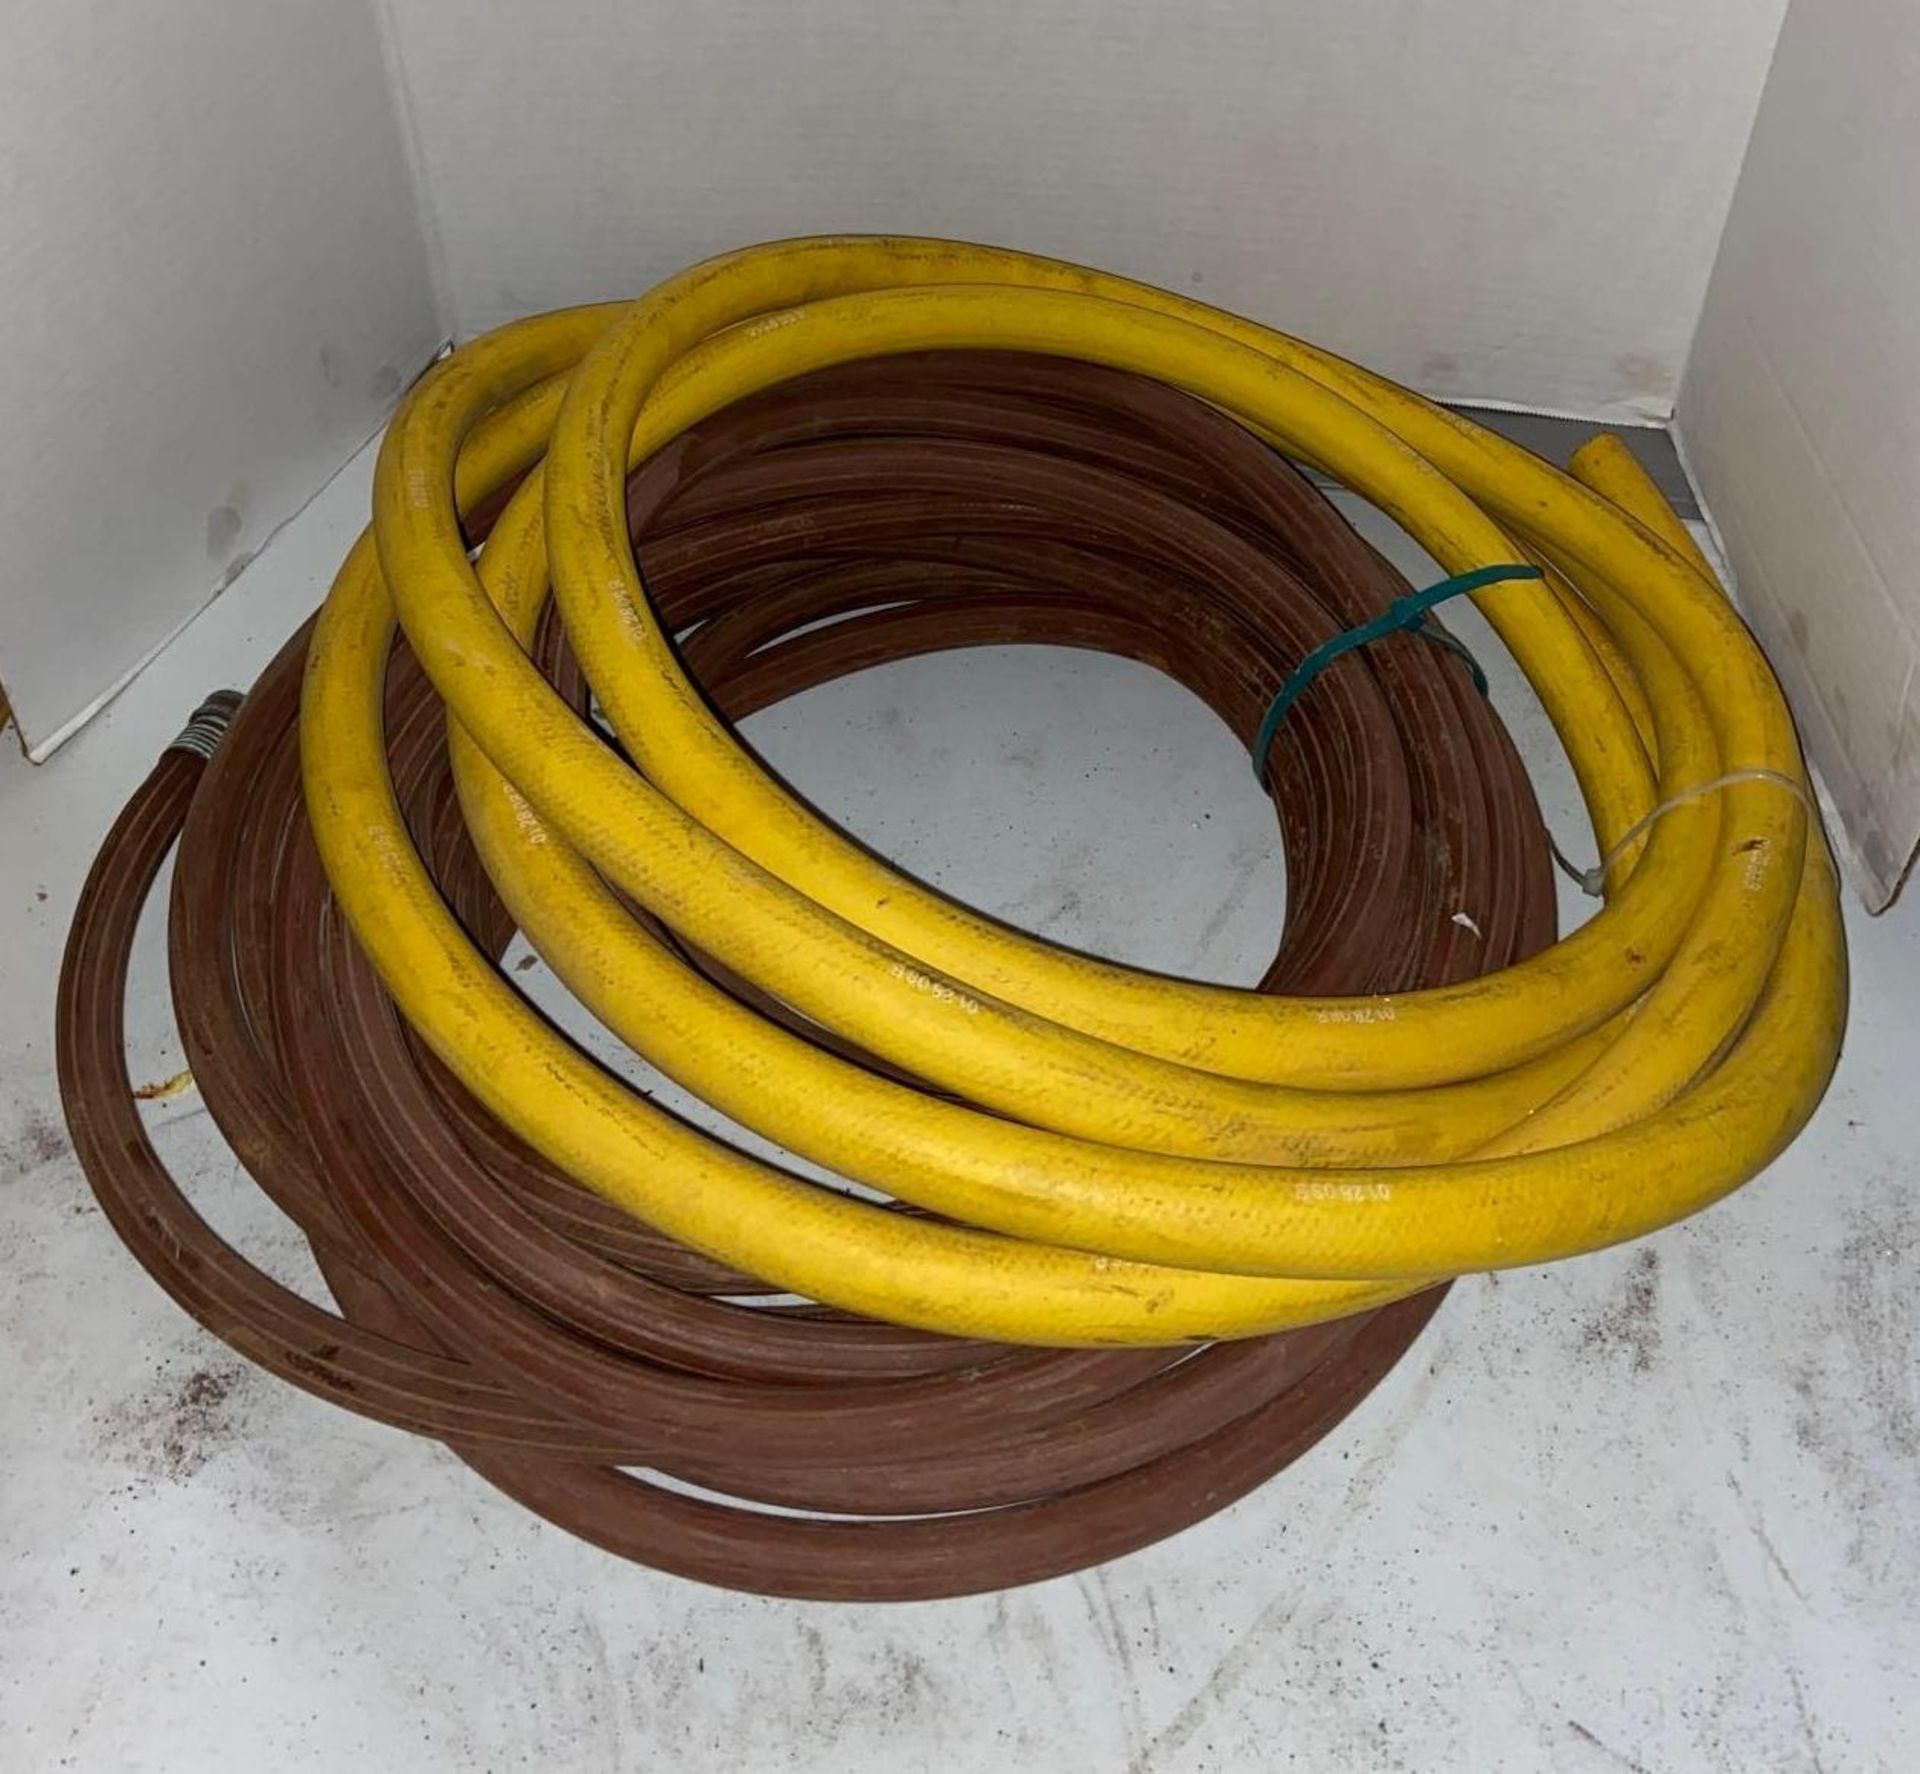 Heavy Duty Jumper Cables & Water Hoses - Image 2 of 3